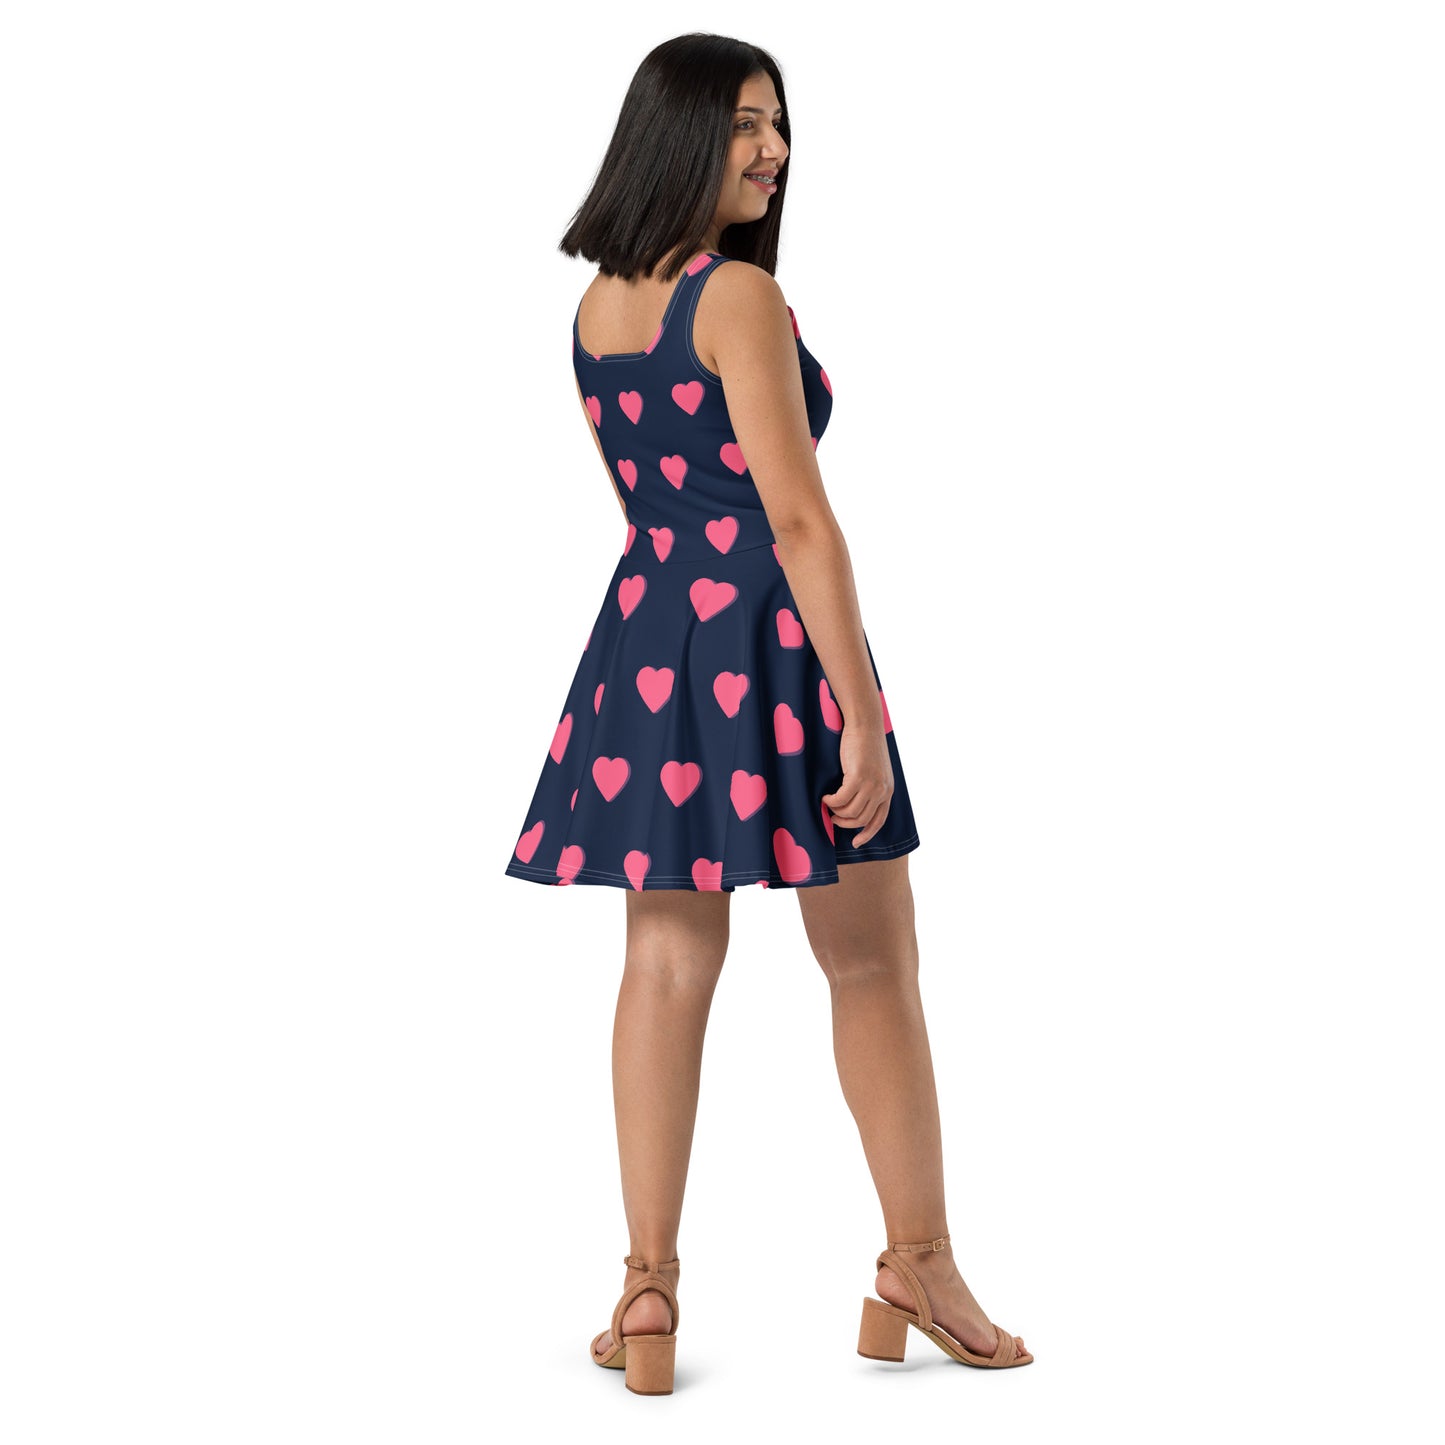 Woman with blue skater dress with hearts 